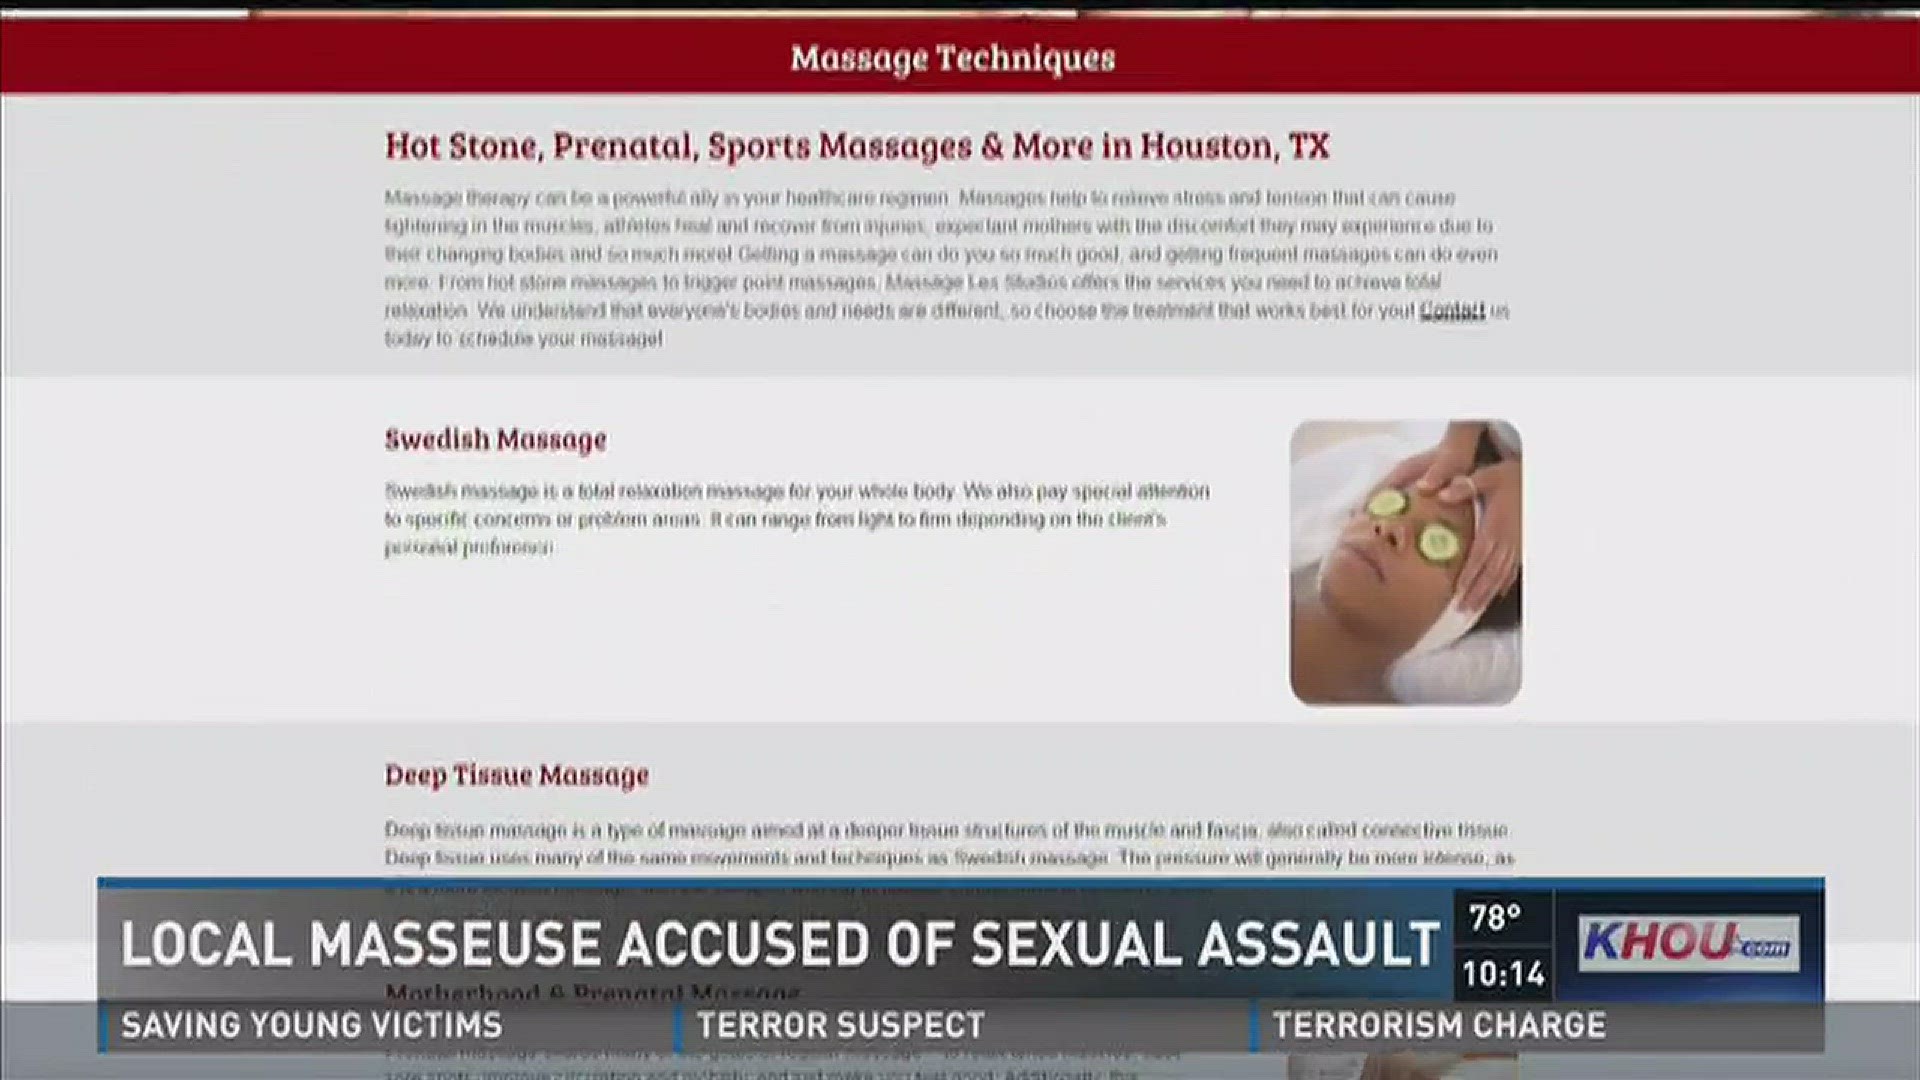 Two woman claim their massage therapist inappropriately touched them.